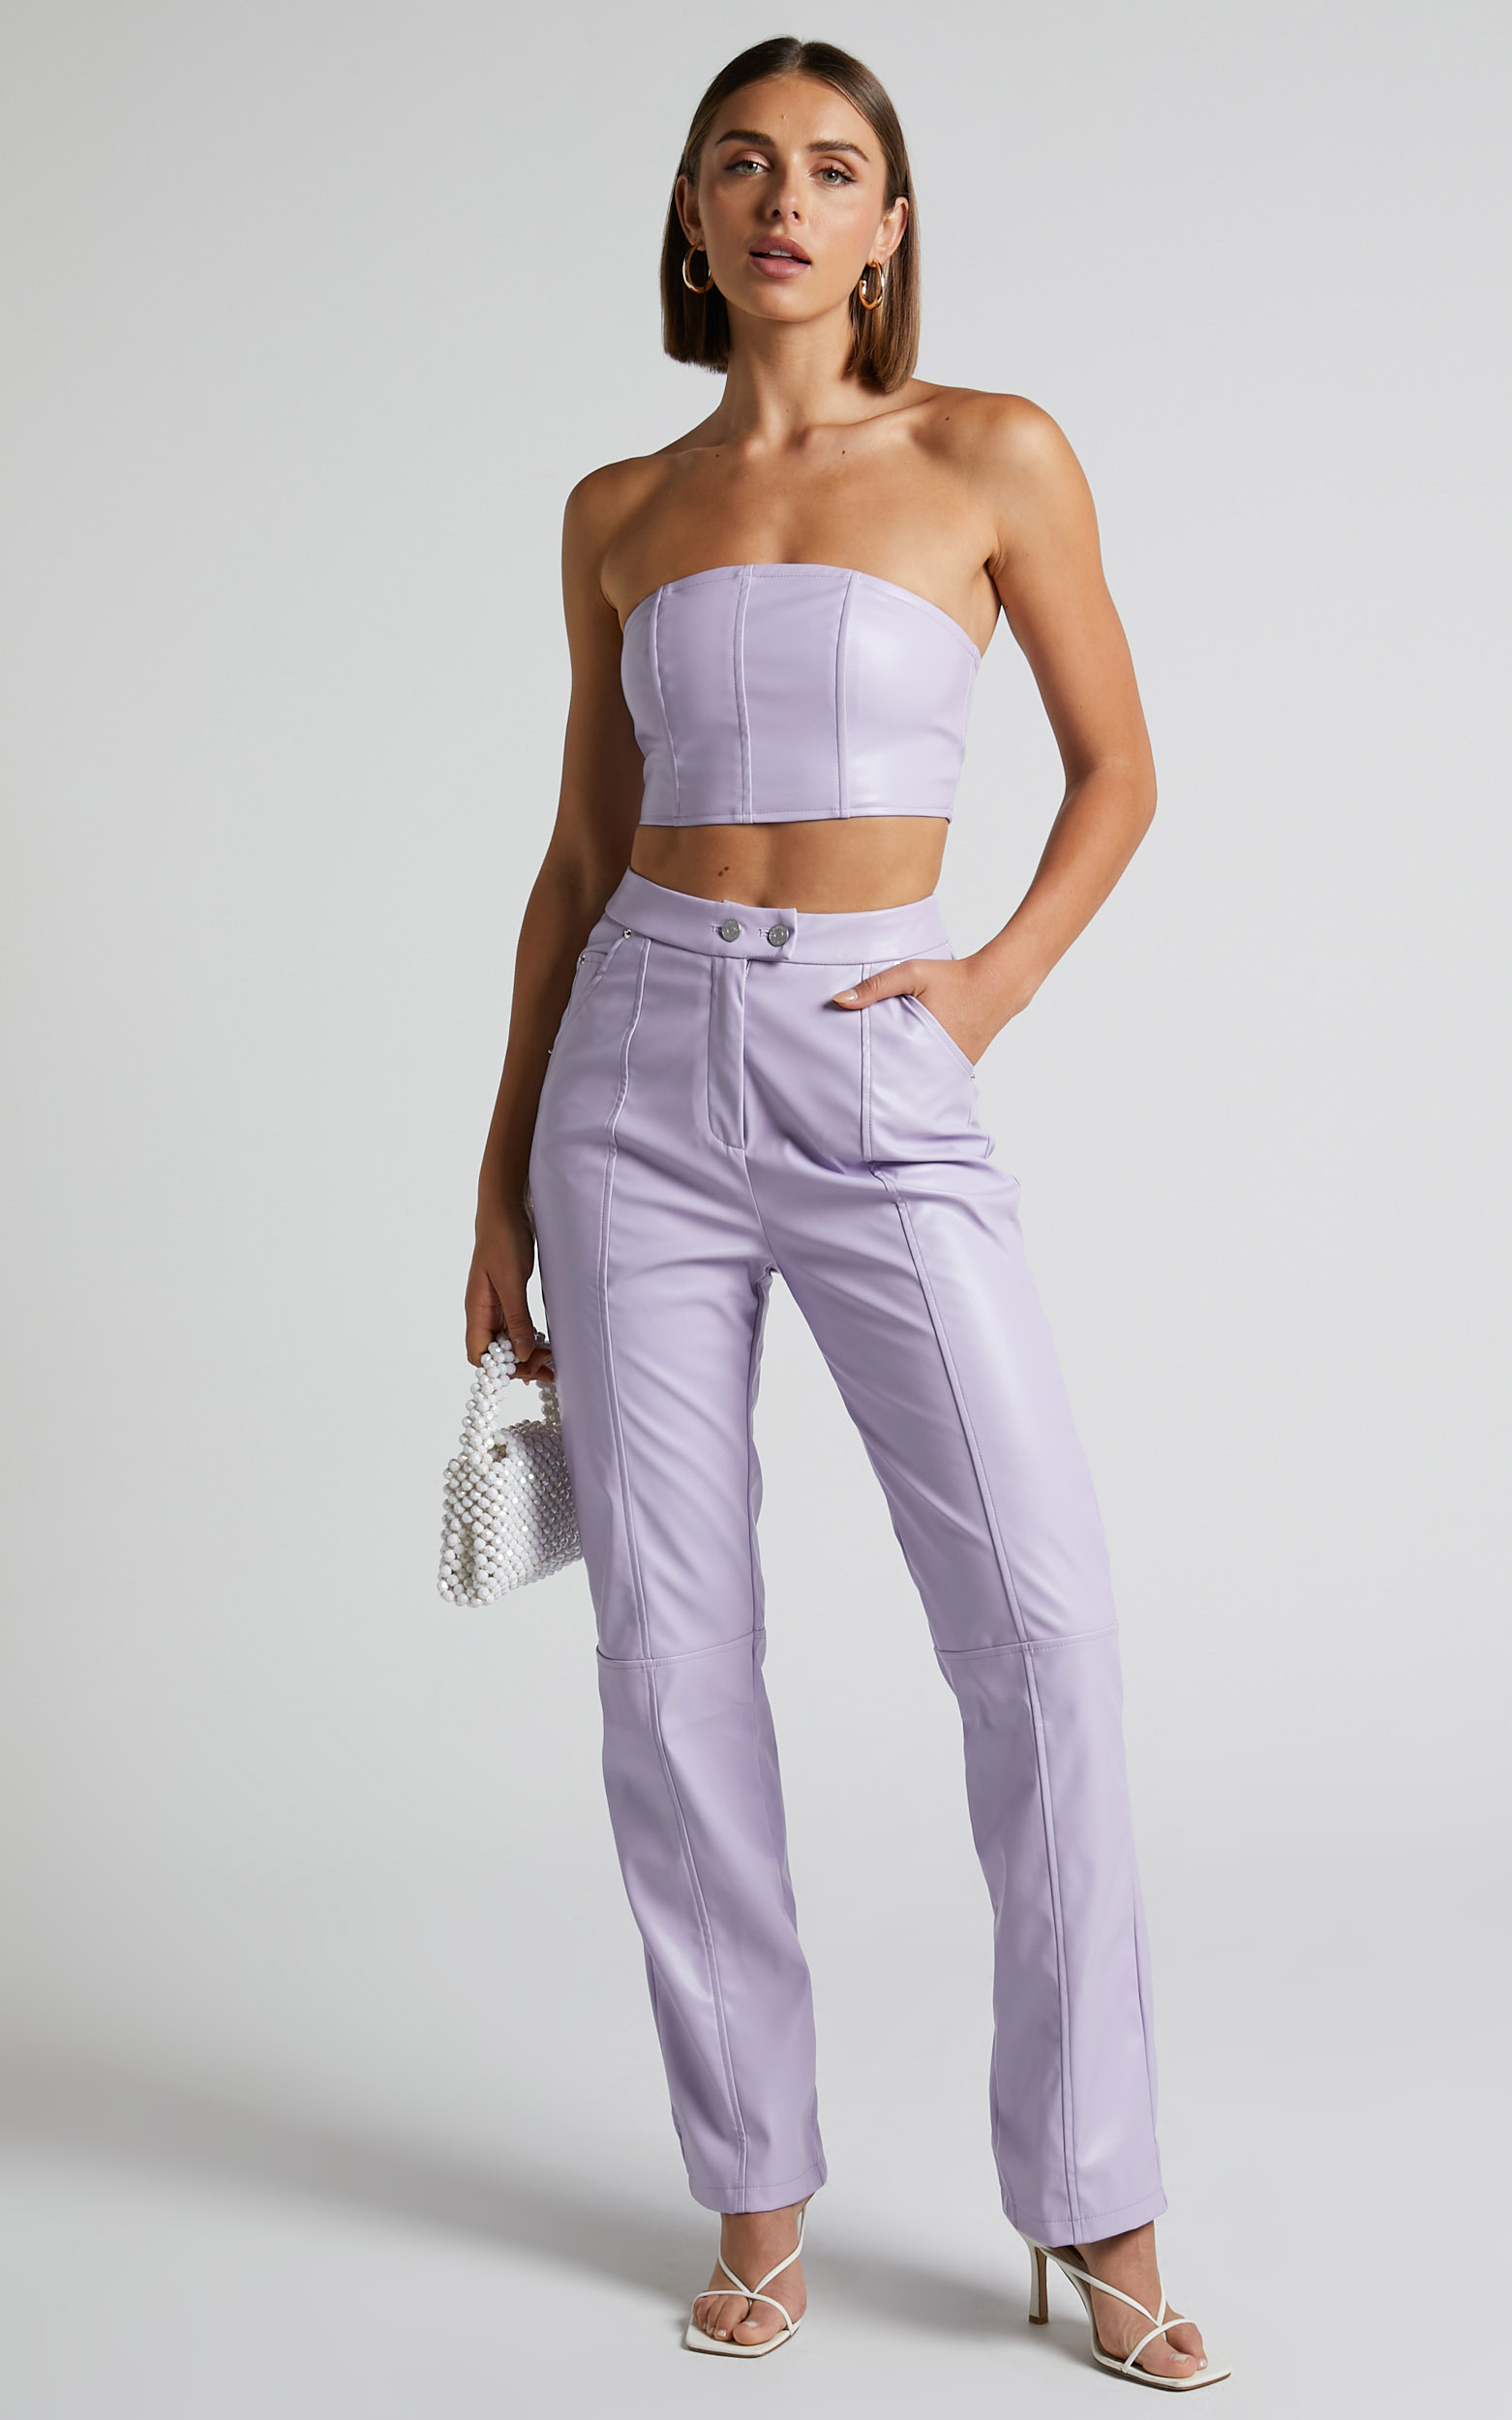 4th & Reckless - Tropez Leather Trouser in Lilac - 06, PRP1, hi-res image number null